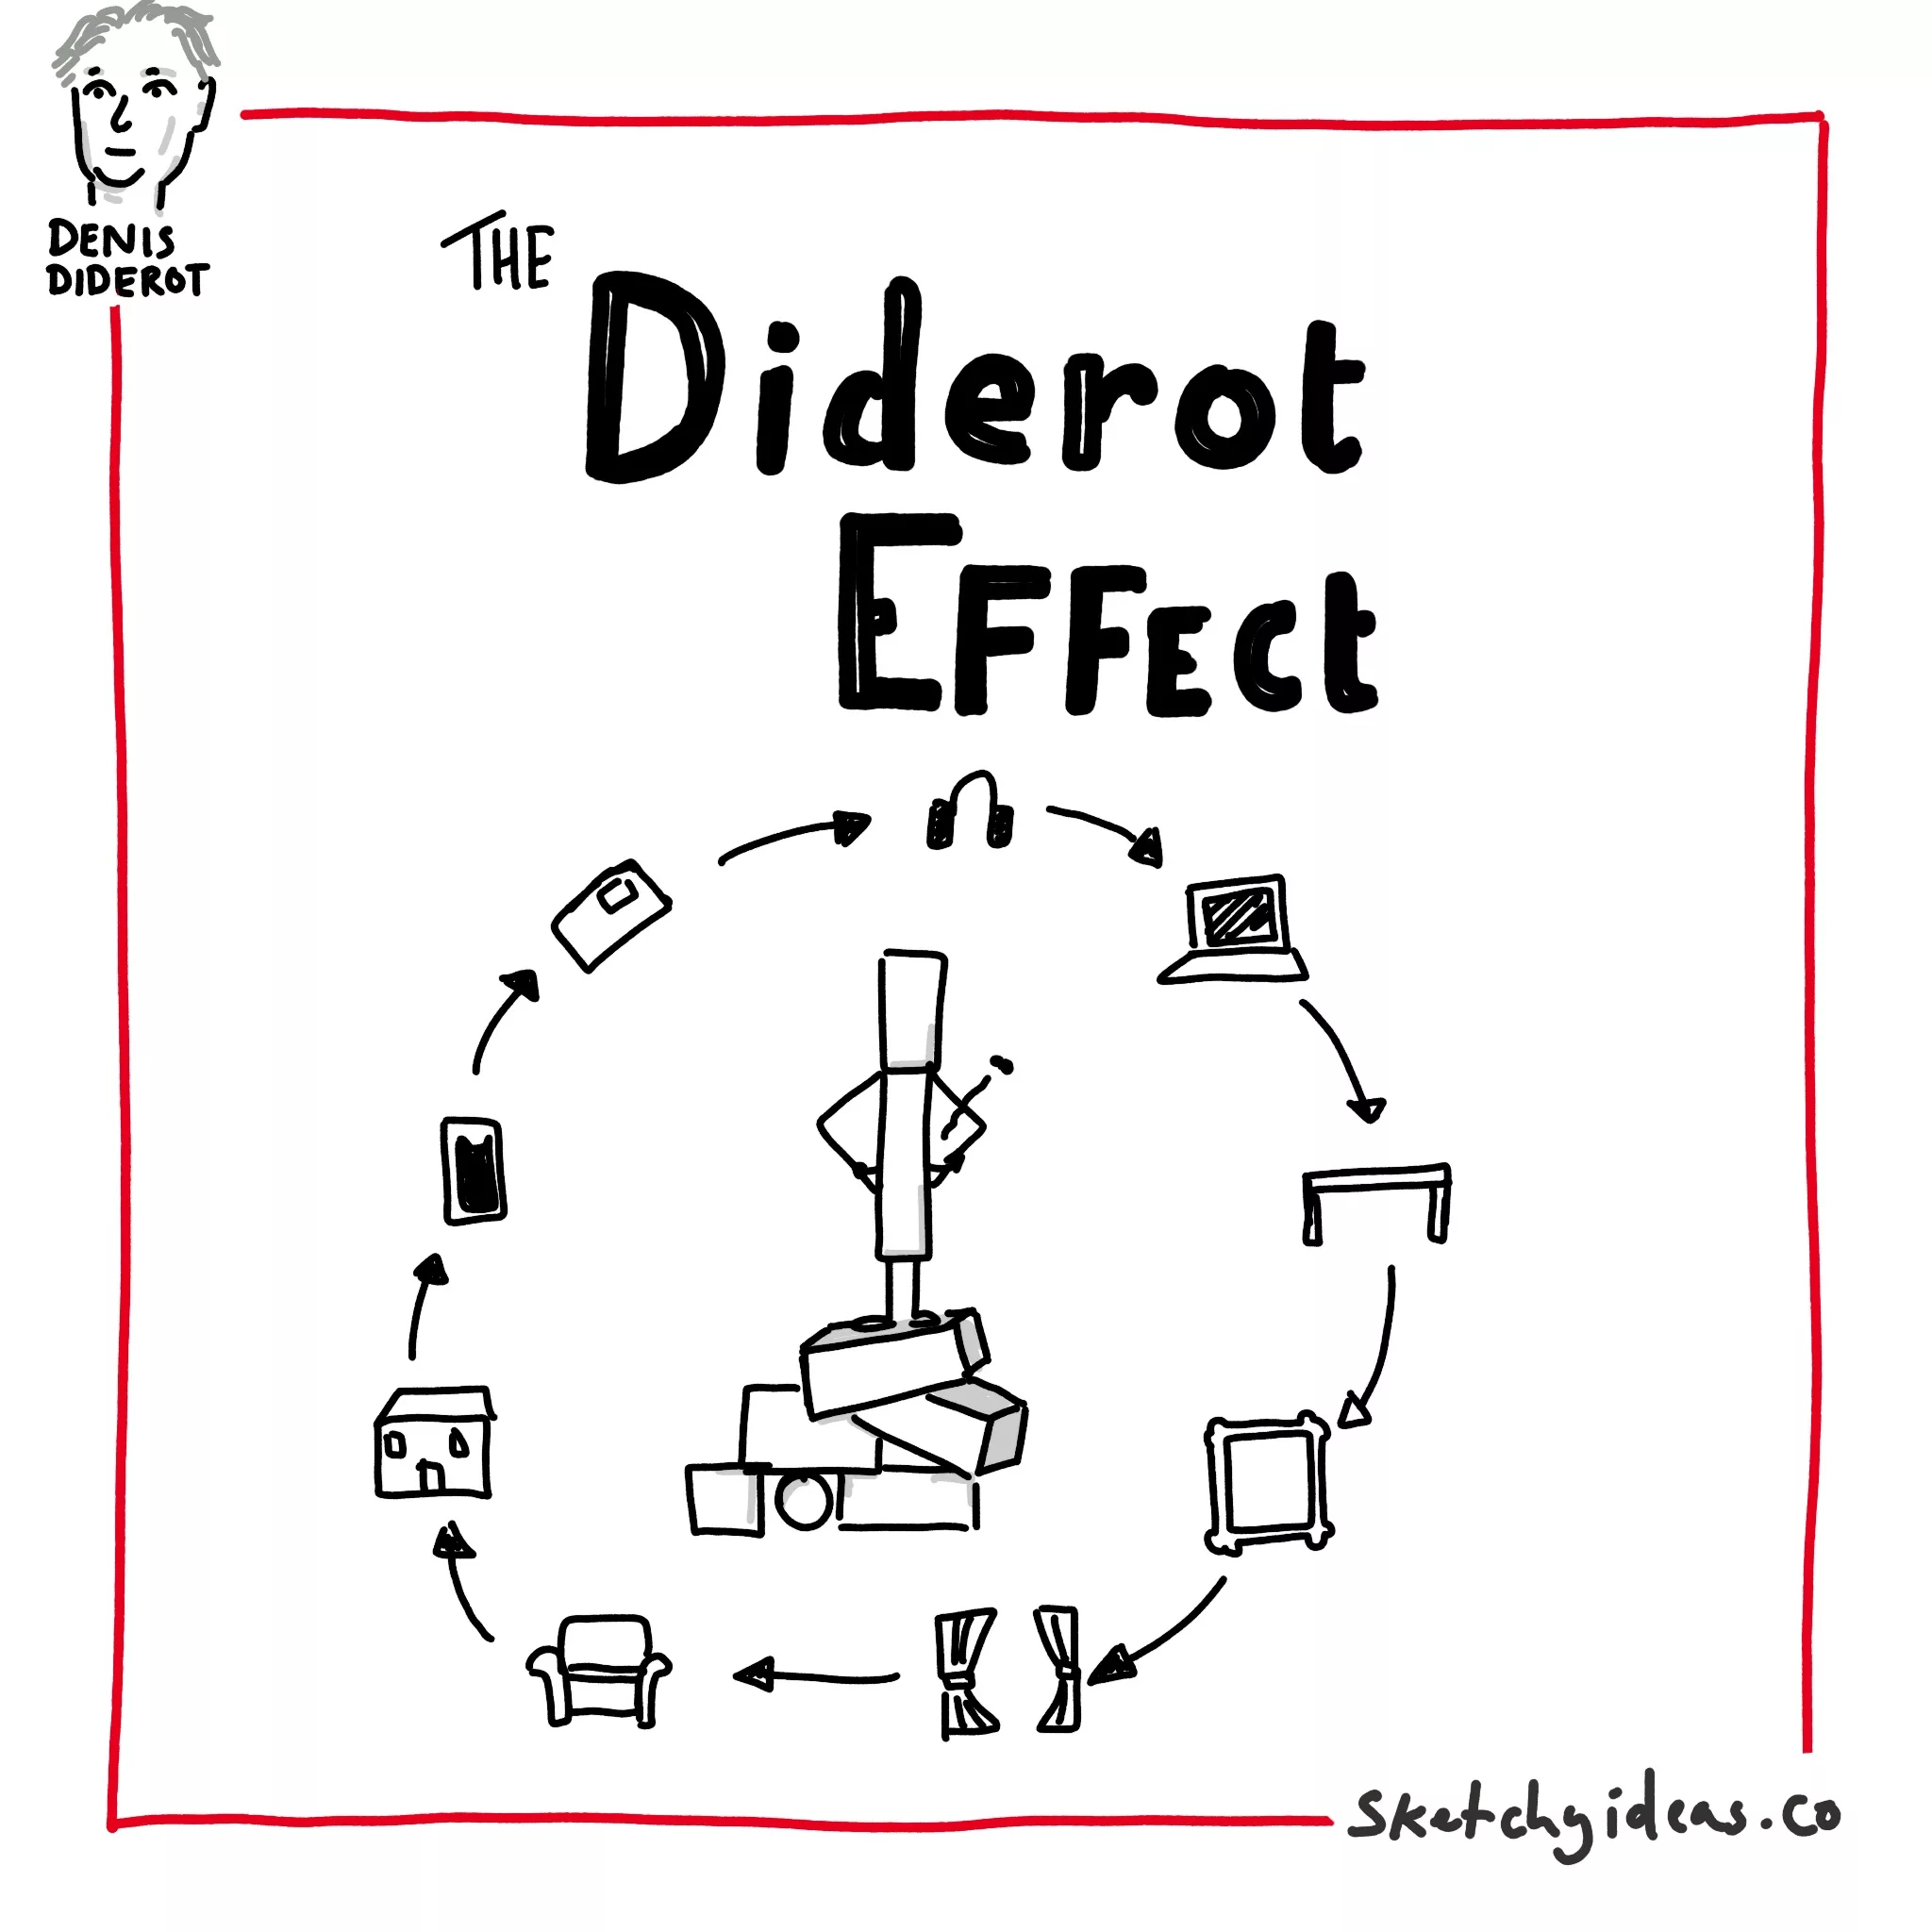 A sketchnote showing the Diderot effect where one purchase leads to more purchases in a cycle of consumption. 